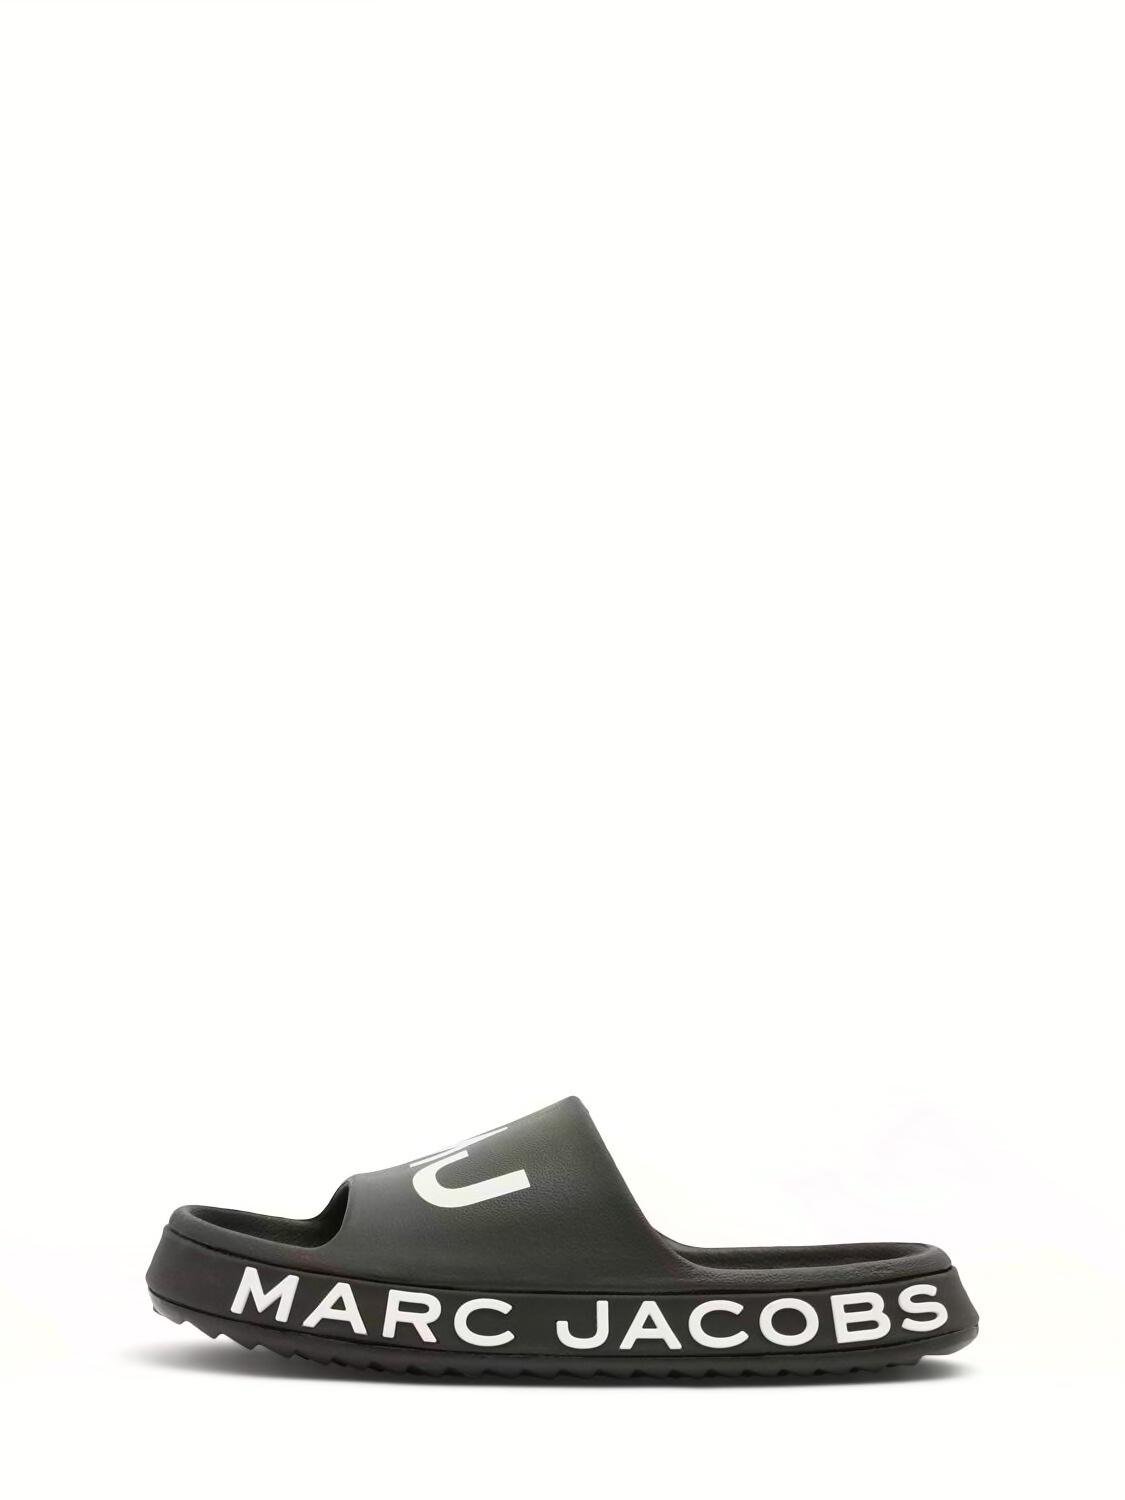 Logo Print Rubber Slides by MARC JACOBS